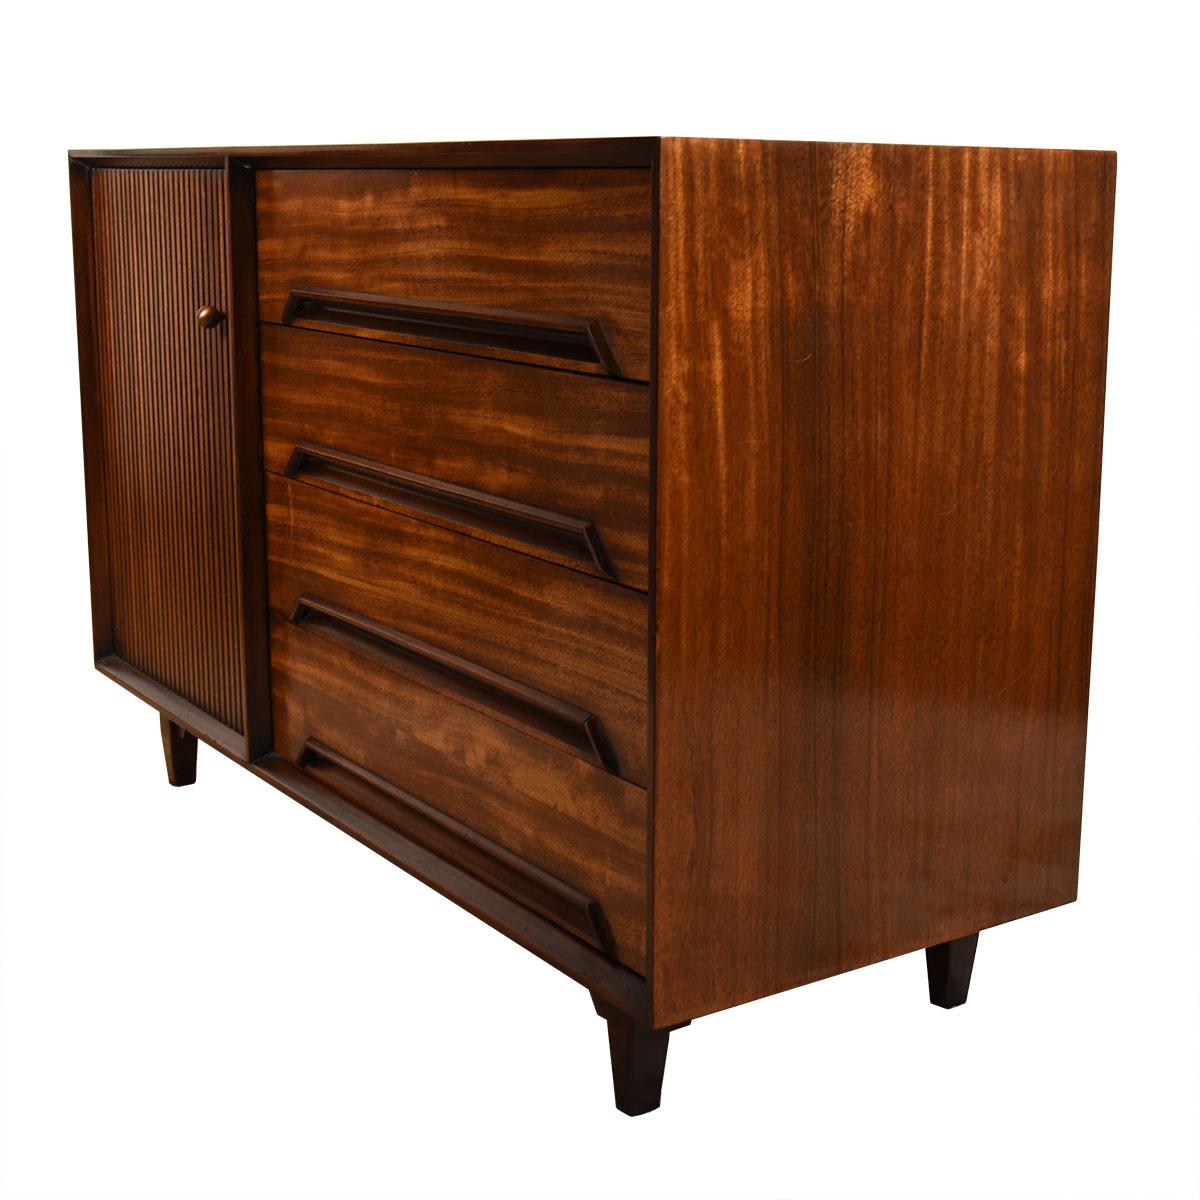 20th Century Exotic Mindoro Wood Cabinet by Milo Baughman for Drexel Perspective, 1951 For Sale